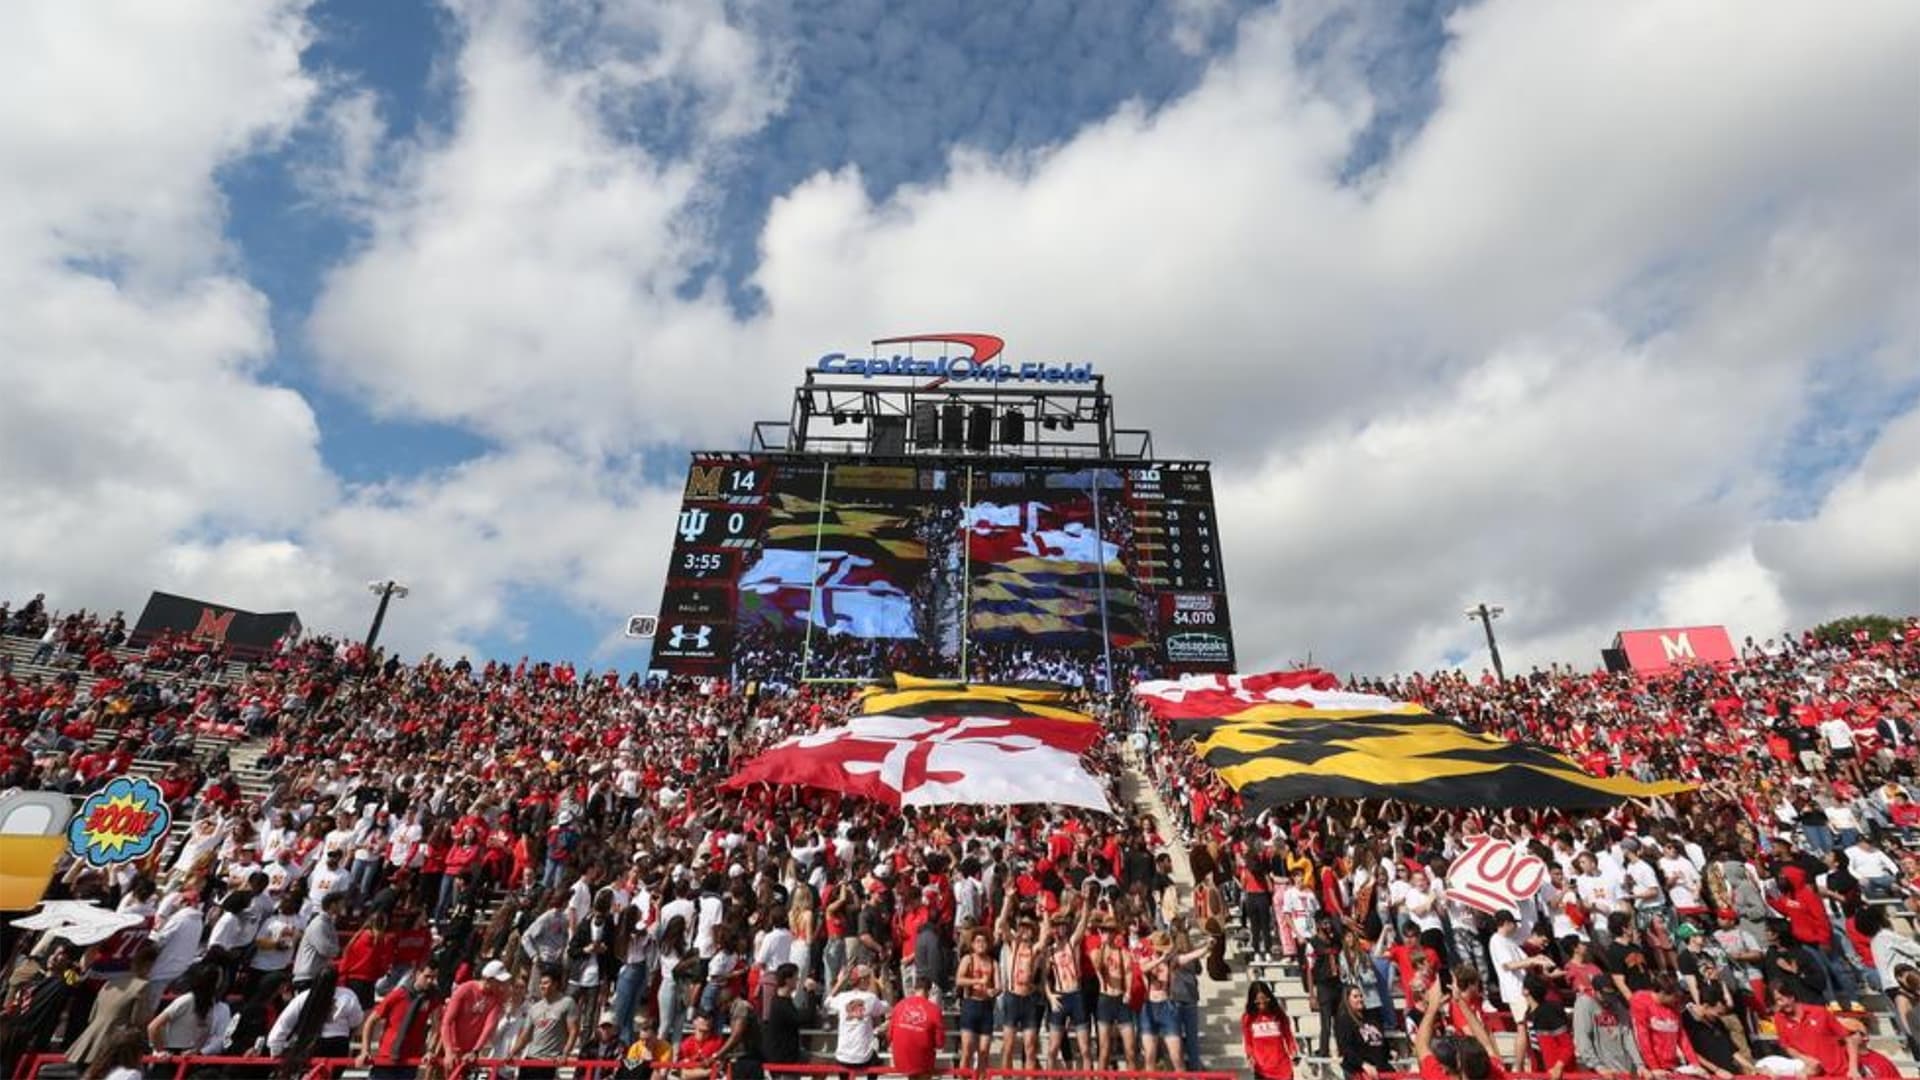 Student section with giant Maryland flag at UMD football game